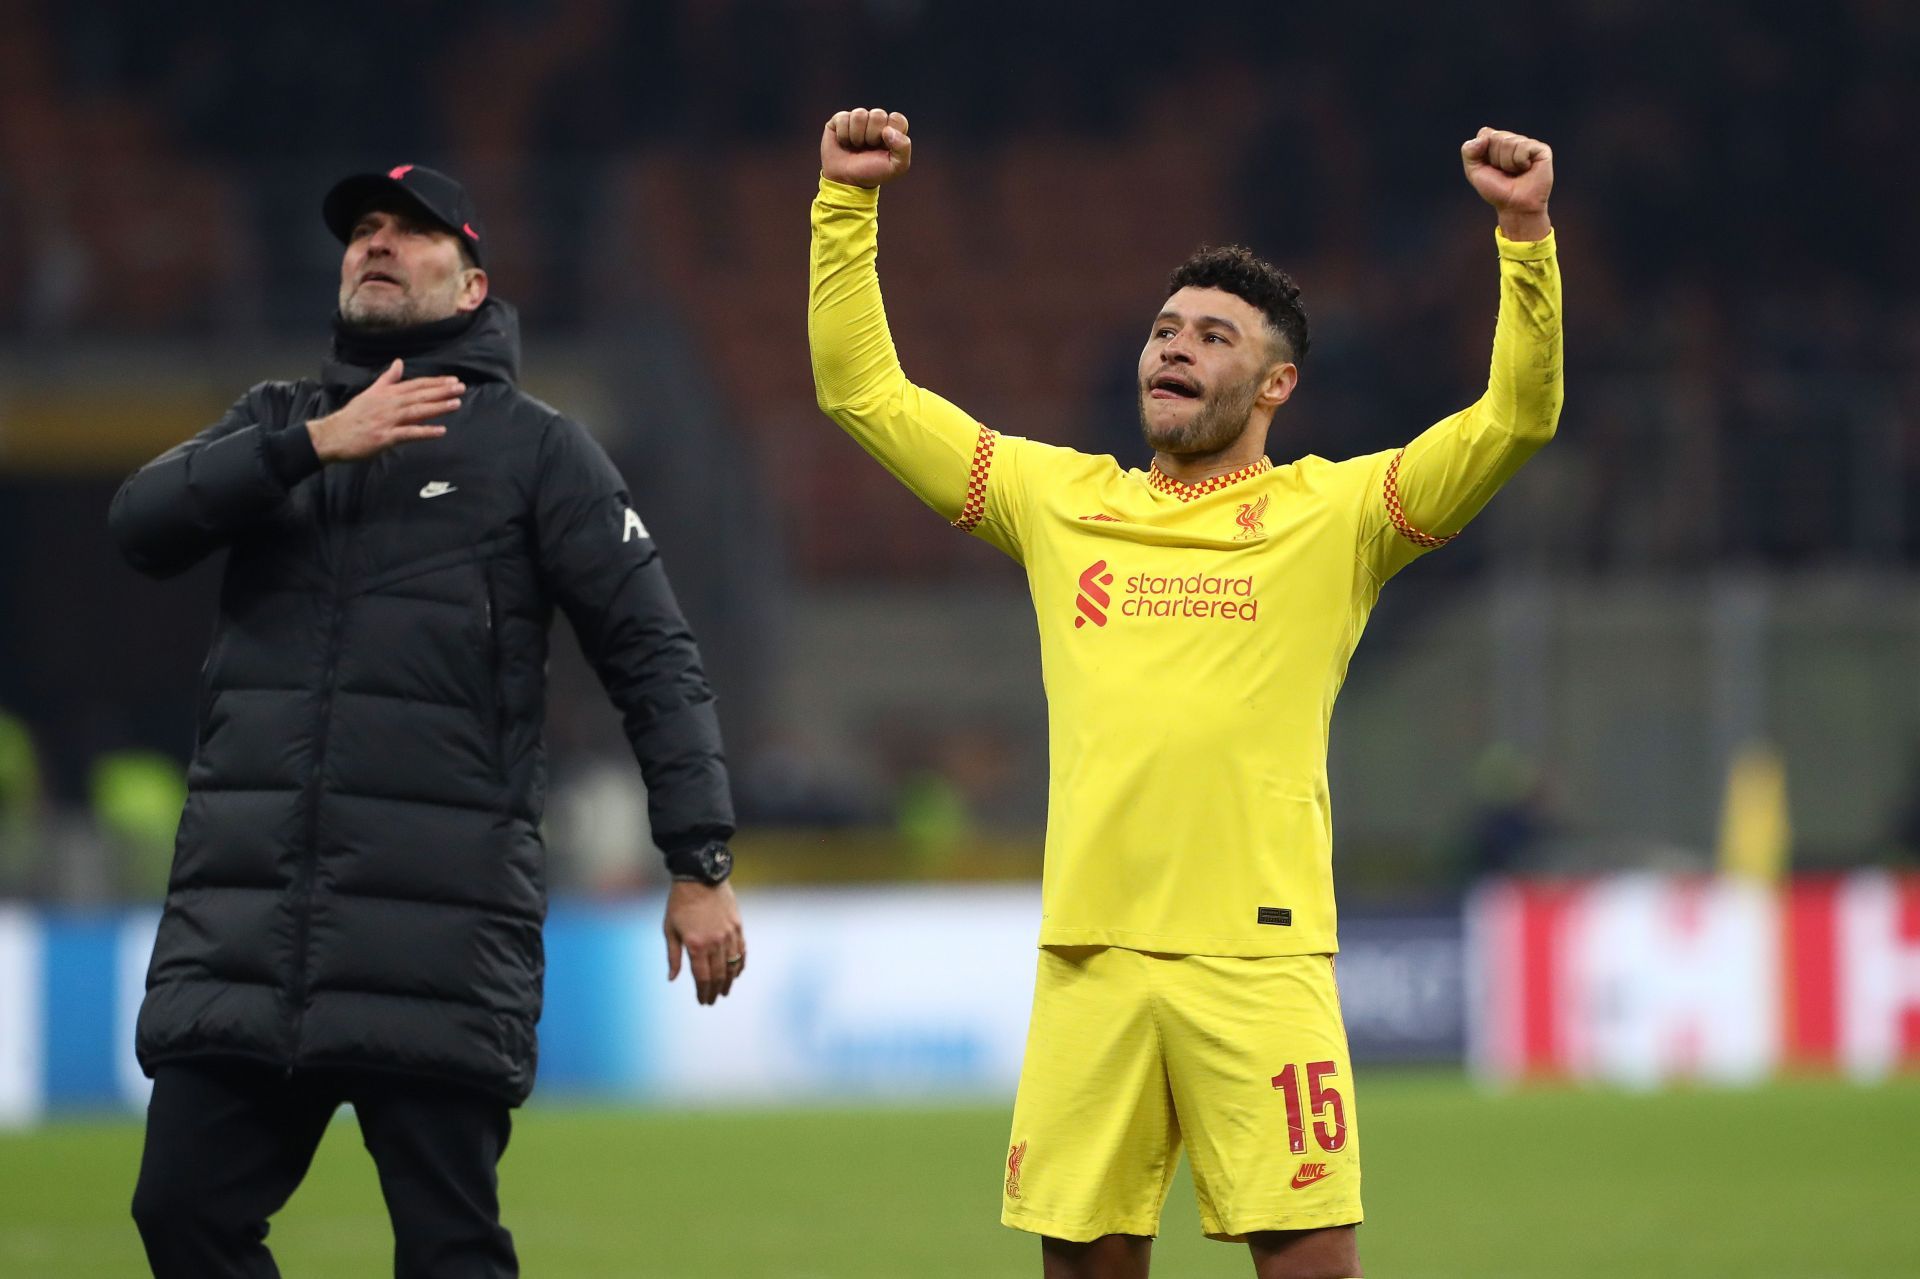 Alex Oxlade-Chamberlain is gaining interest from Premier League sides